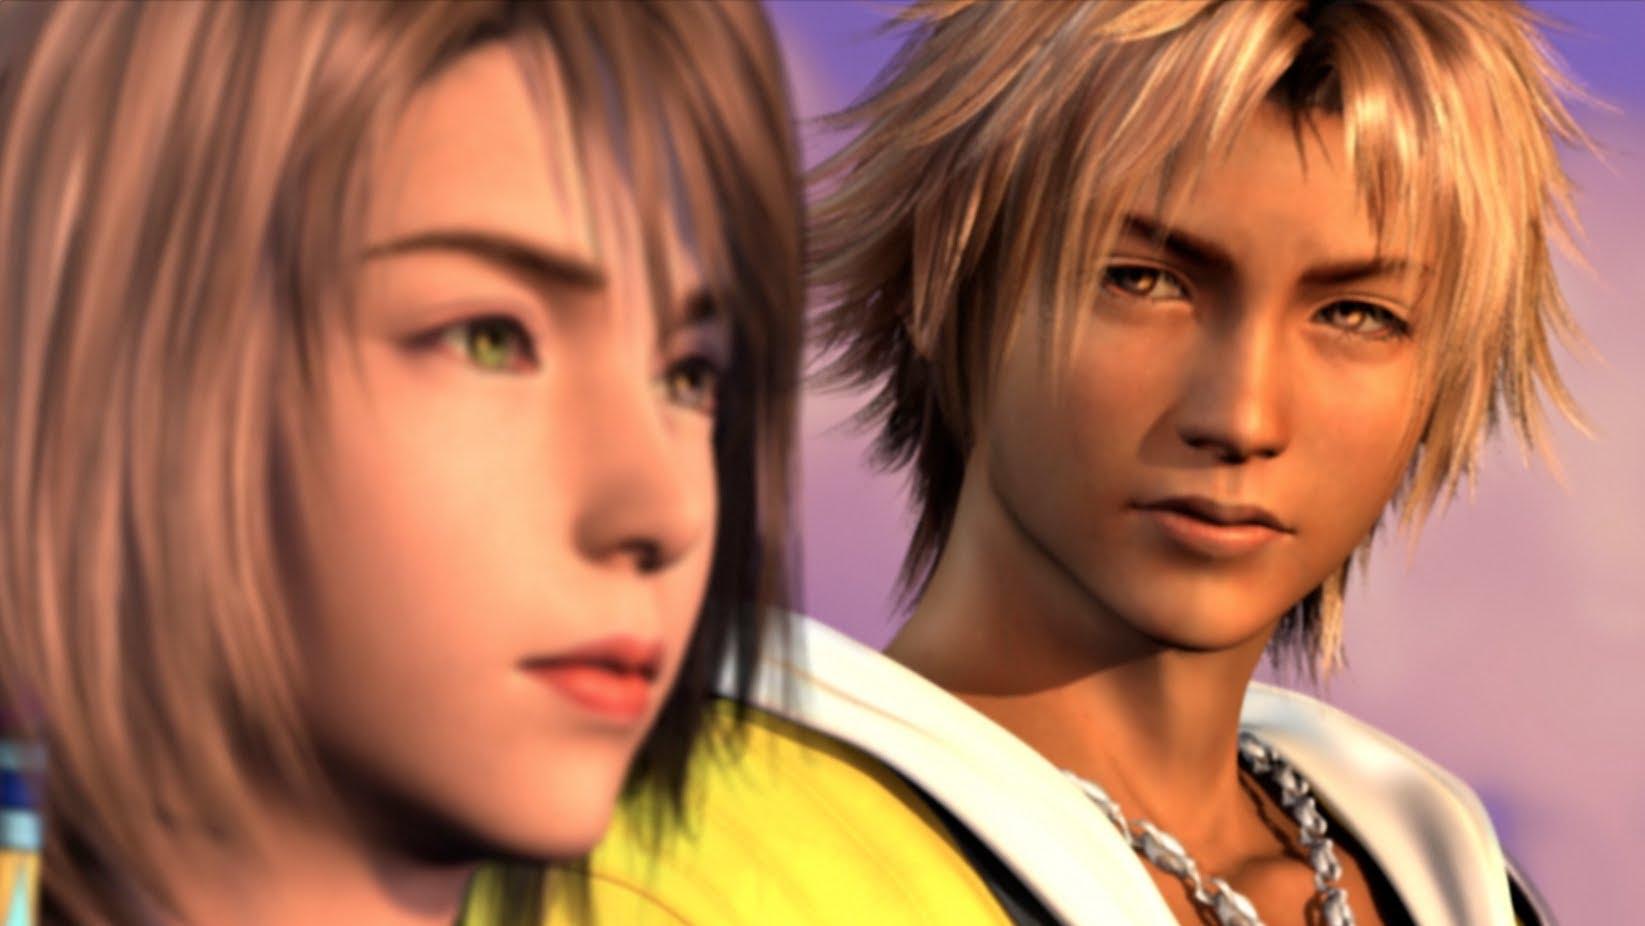 Yuna standing beside Tidus in the sunset.